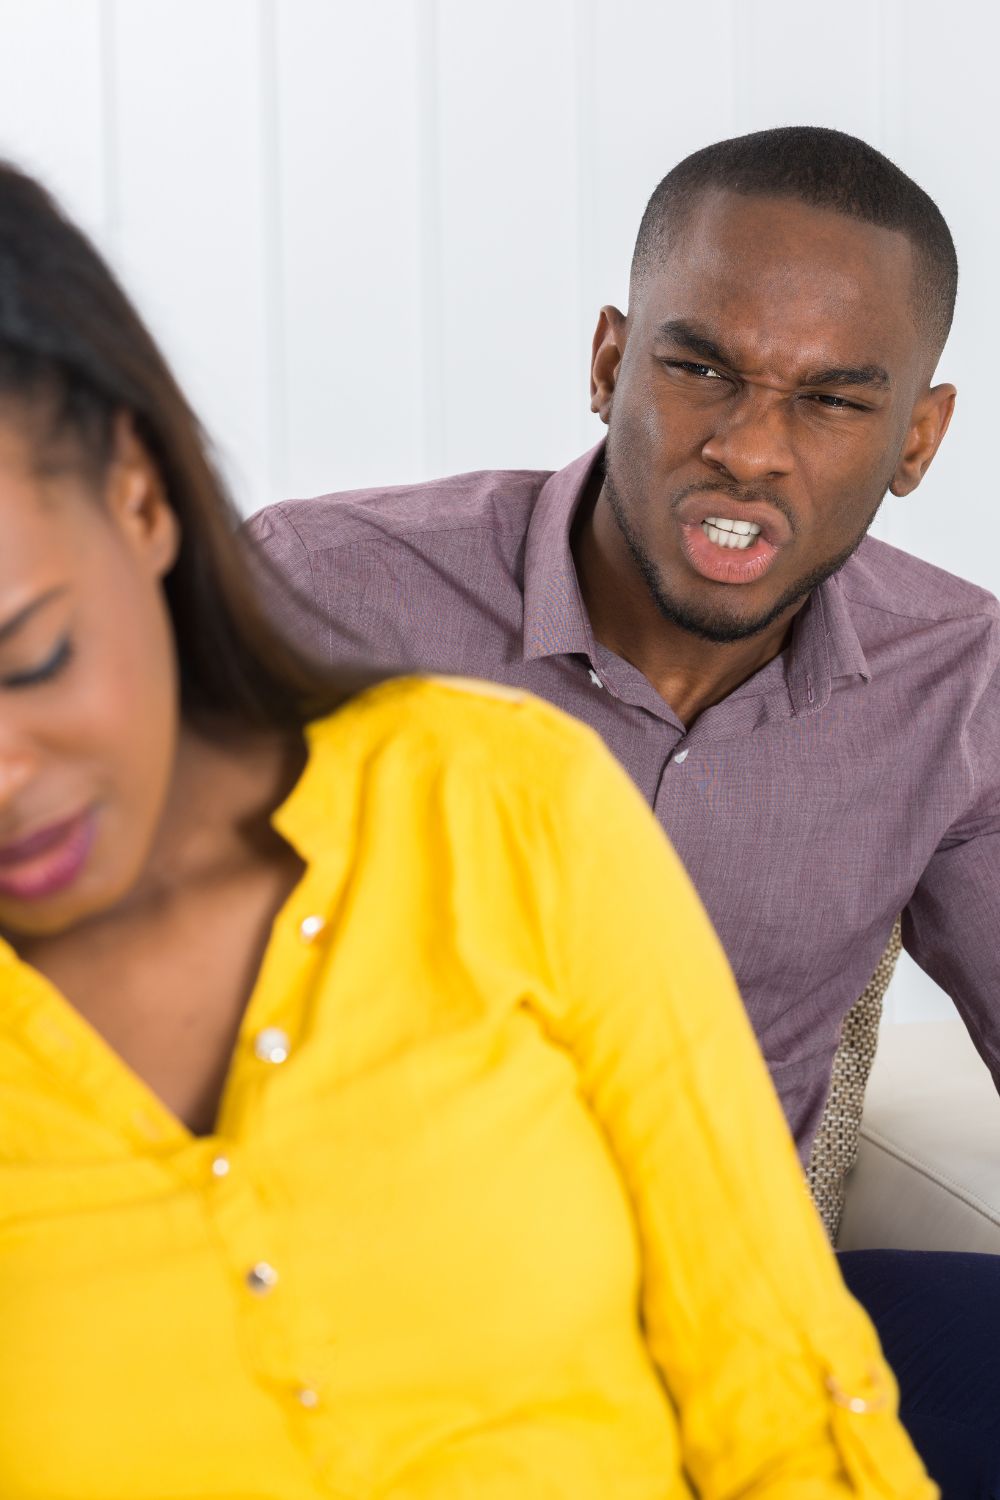 A wise woman will never marry a man who does these 6 things